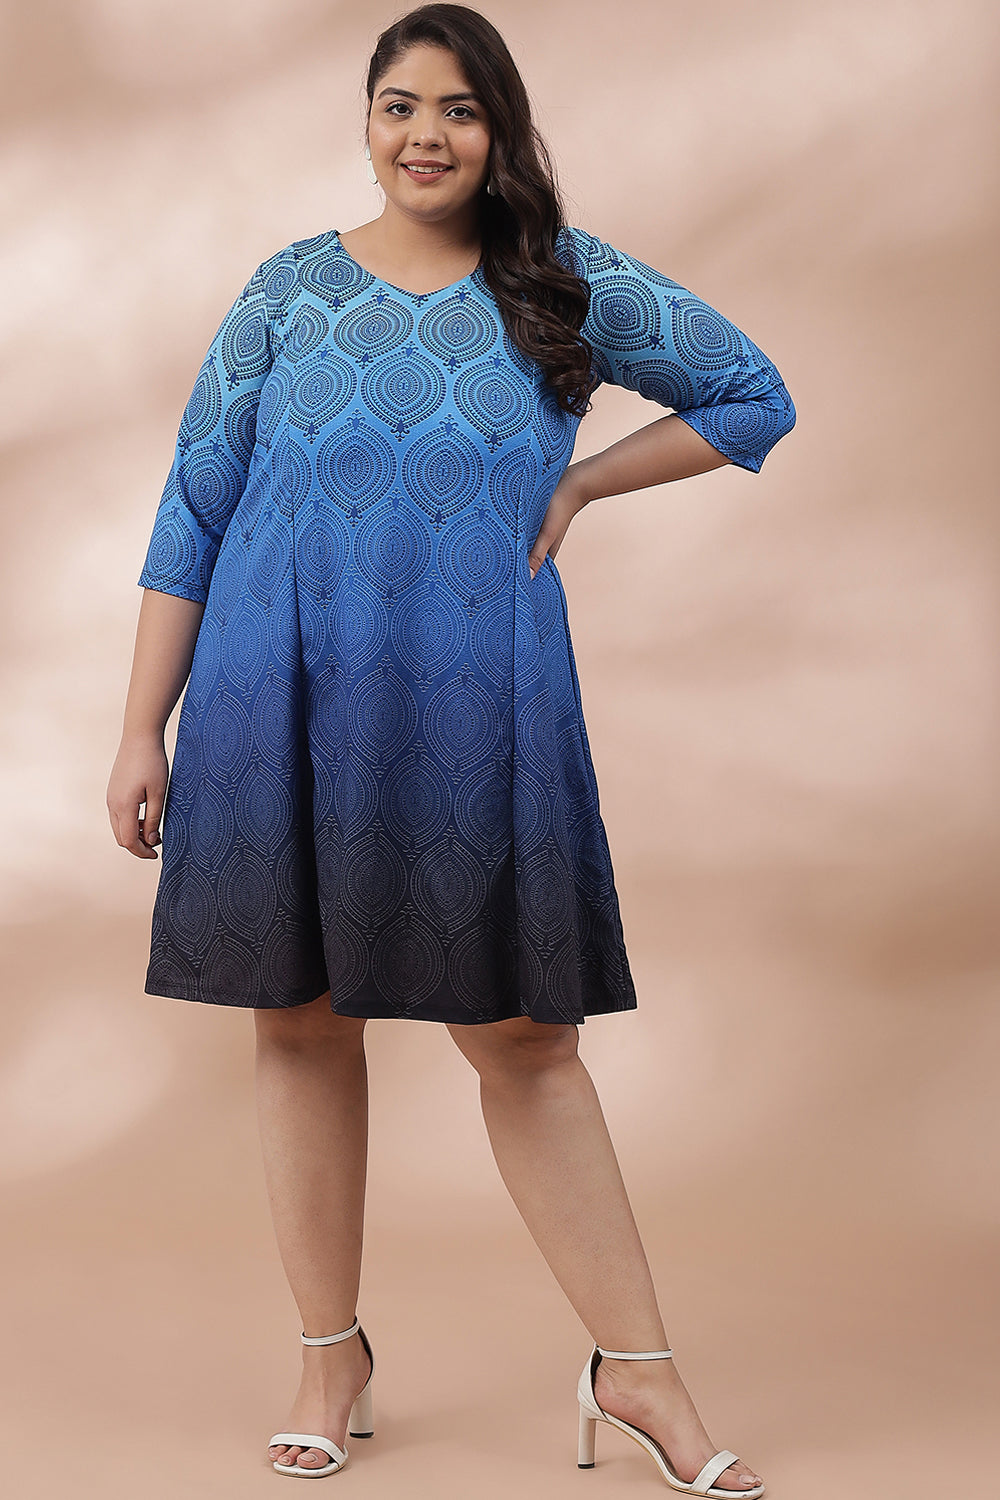 Buy Blues Ombre Printed Dress